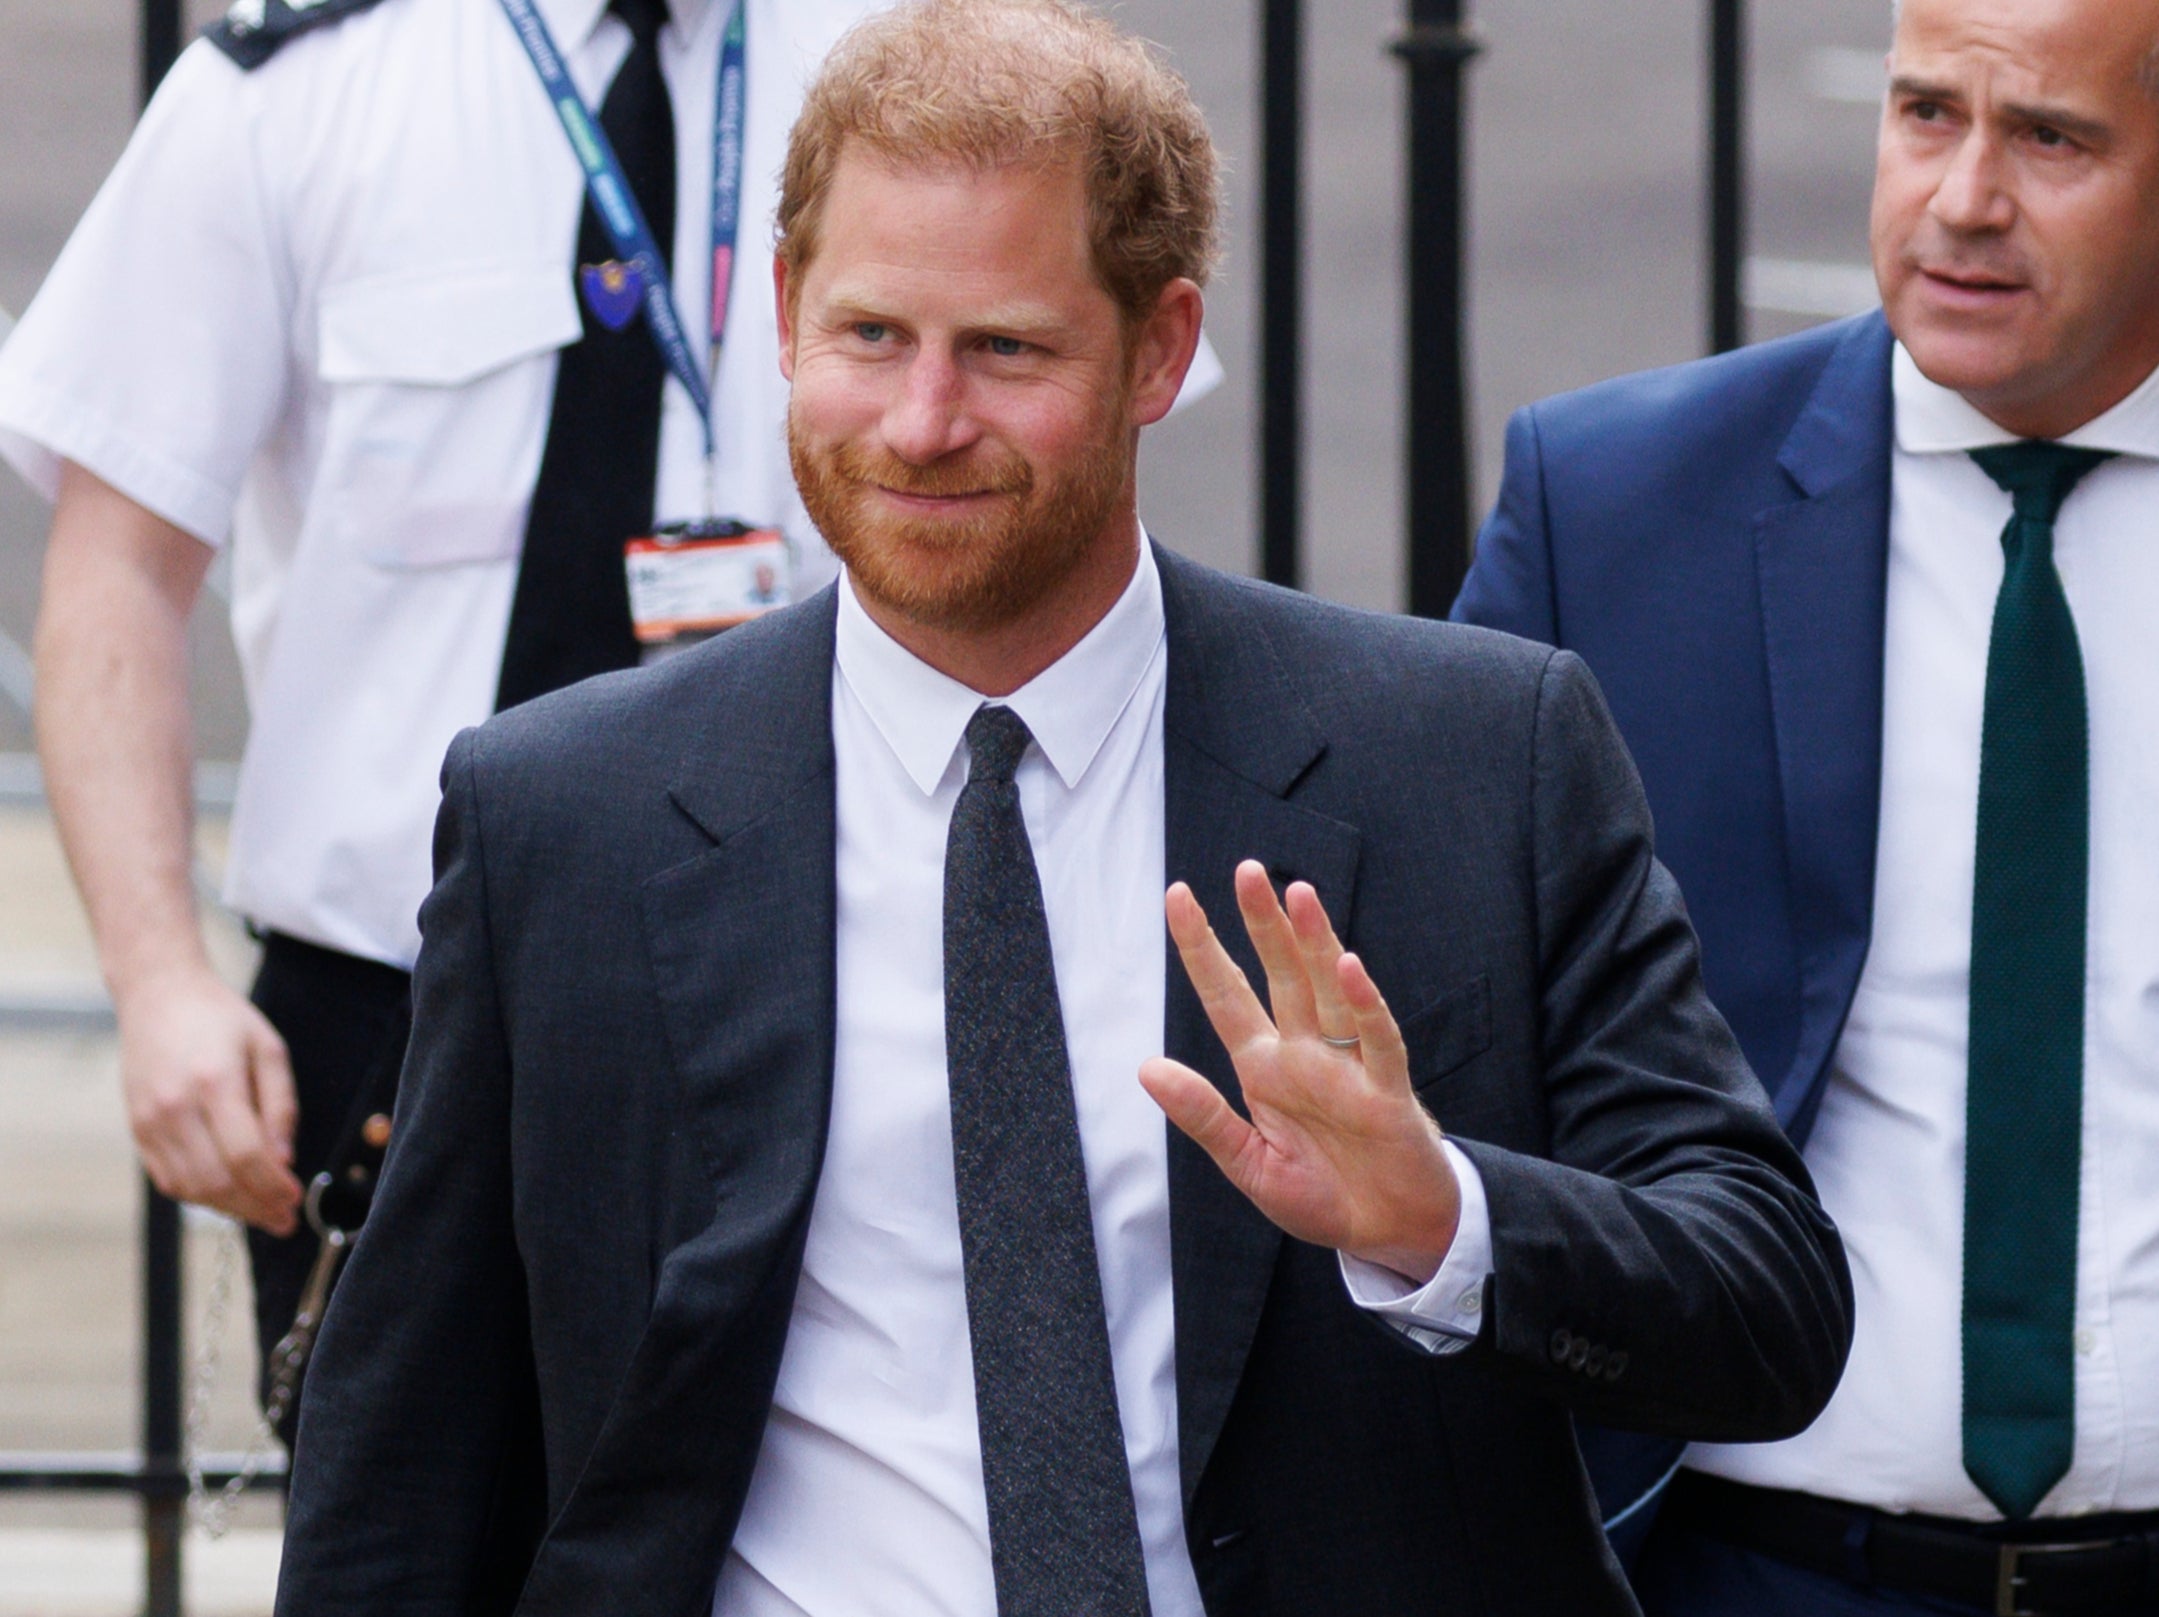 Prince Harry is set to give evidence at the High Court in London on Tuesday